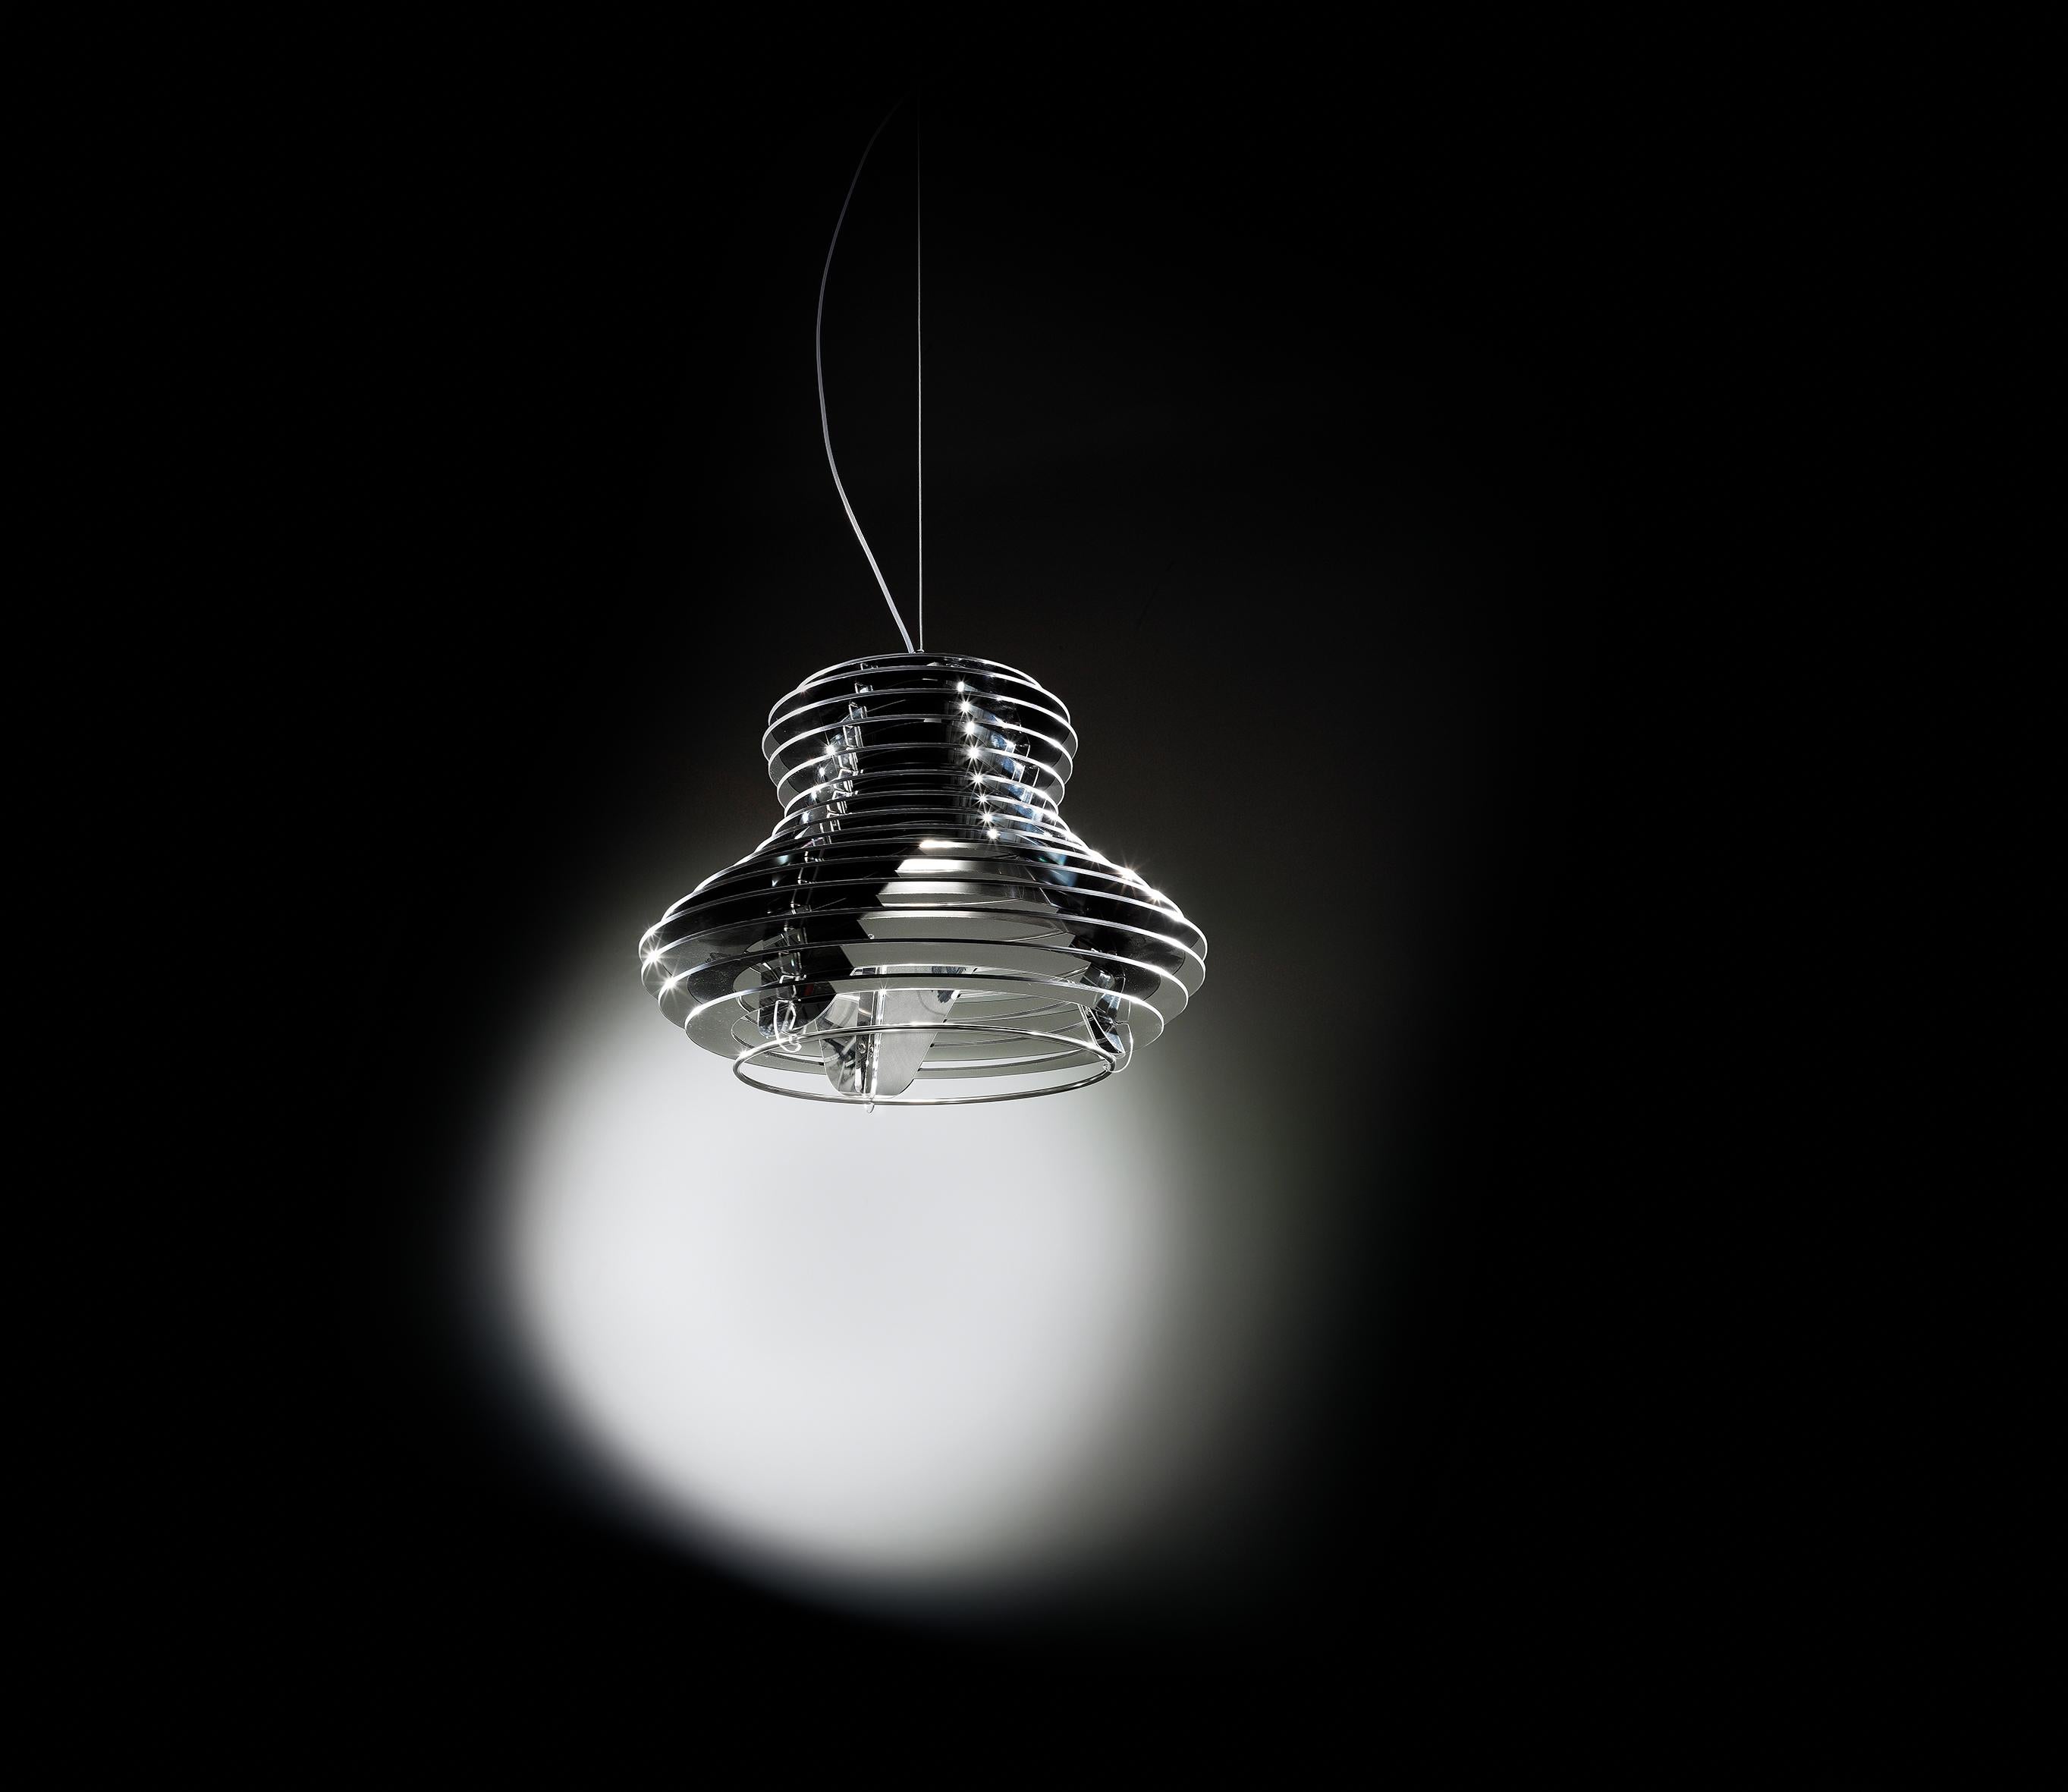 A modern shape, rigorous geometry, rigid and penetrating lines that soften around a central cone surrounded by layered rings that play with the light without losing form. The lamp’s curves were inspired by the evocative rolling hills of the Tuscan